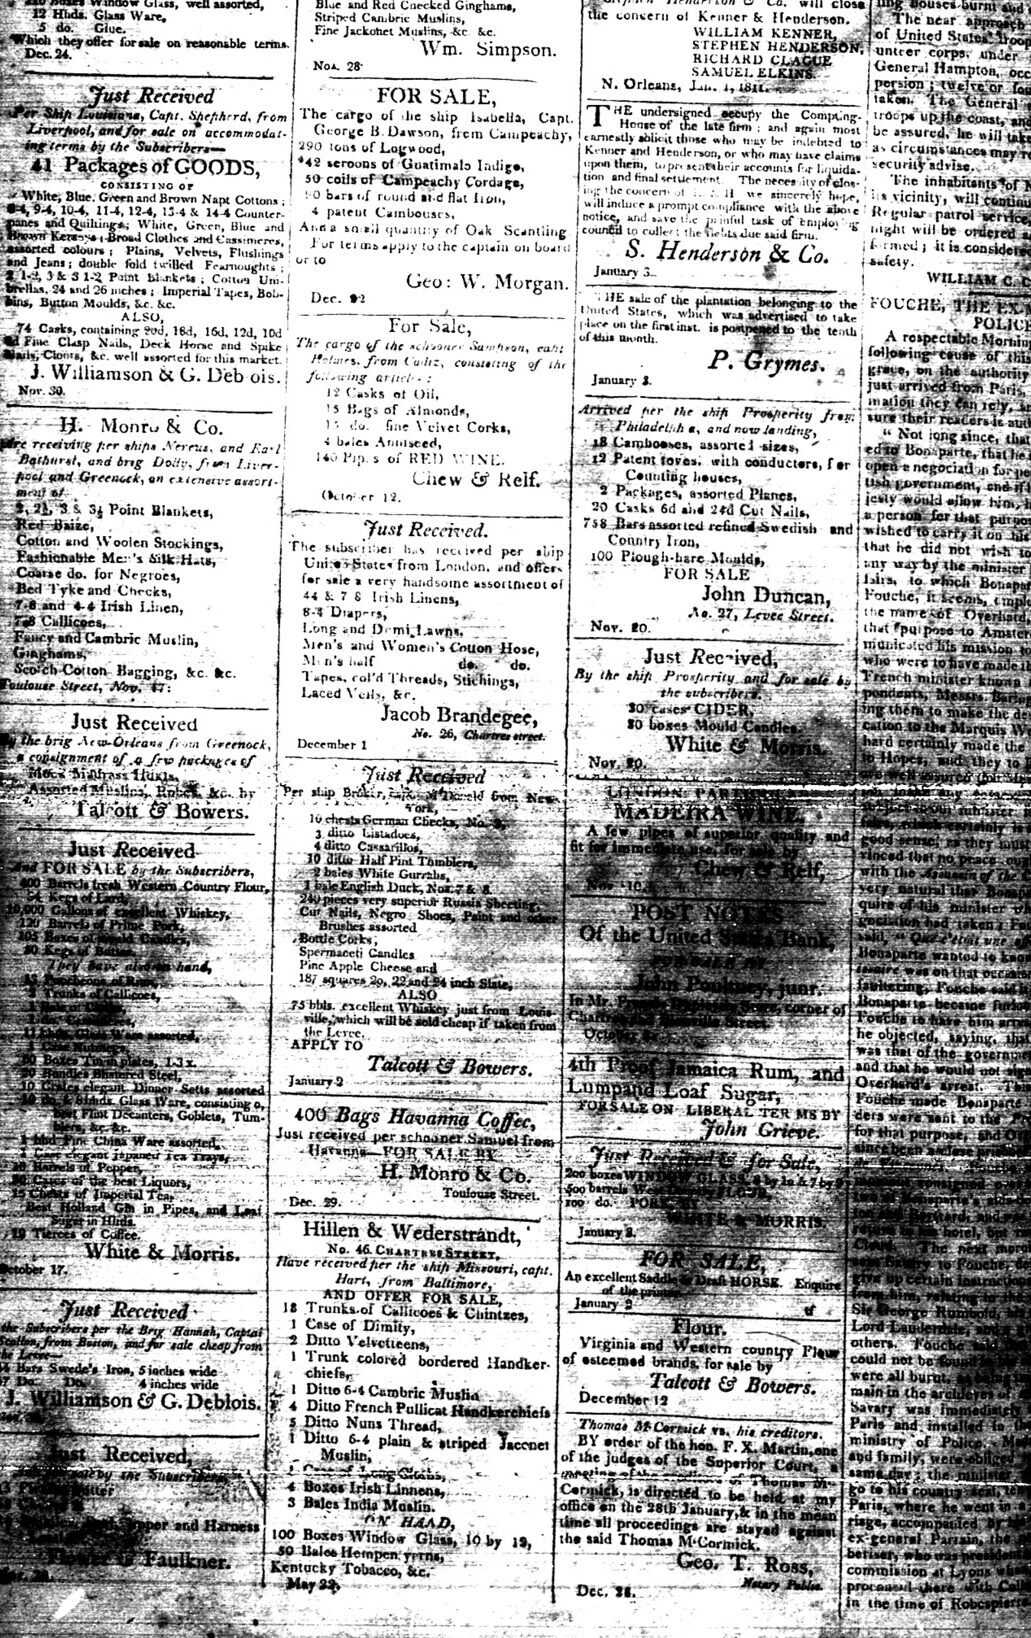 Newspaper article detailing the march of enslaved persons led by Charles Deslondes by